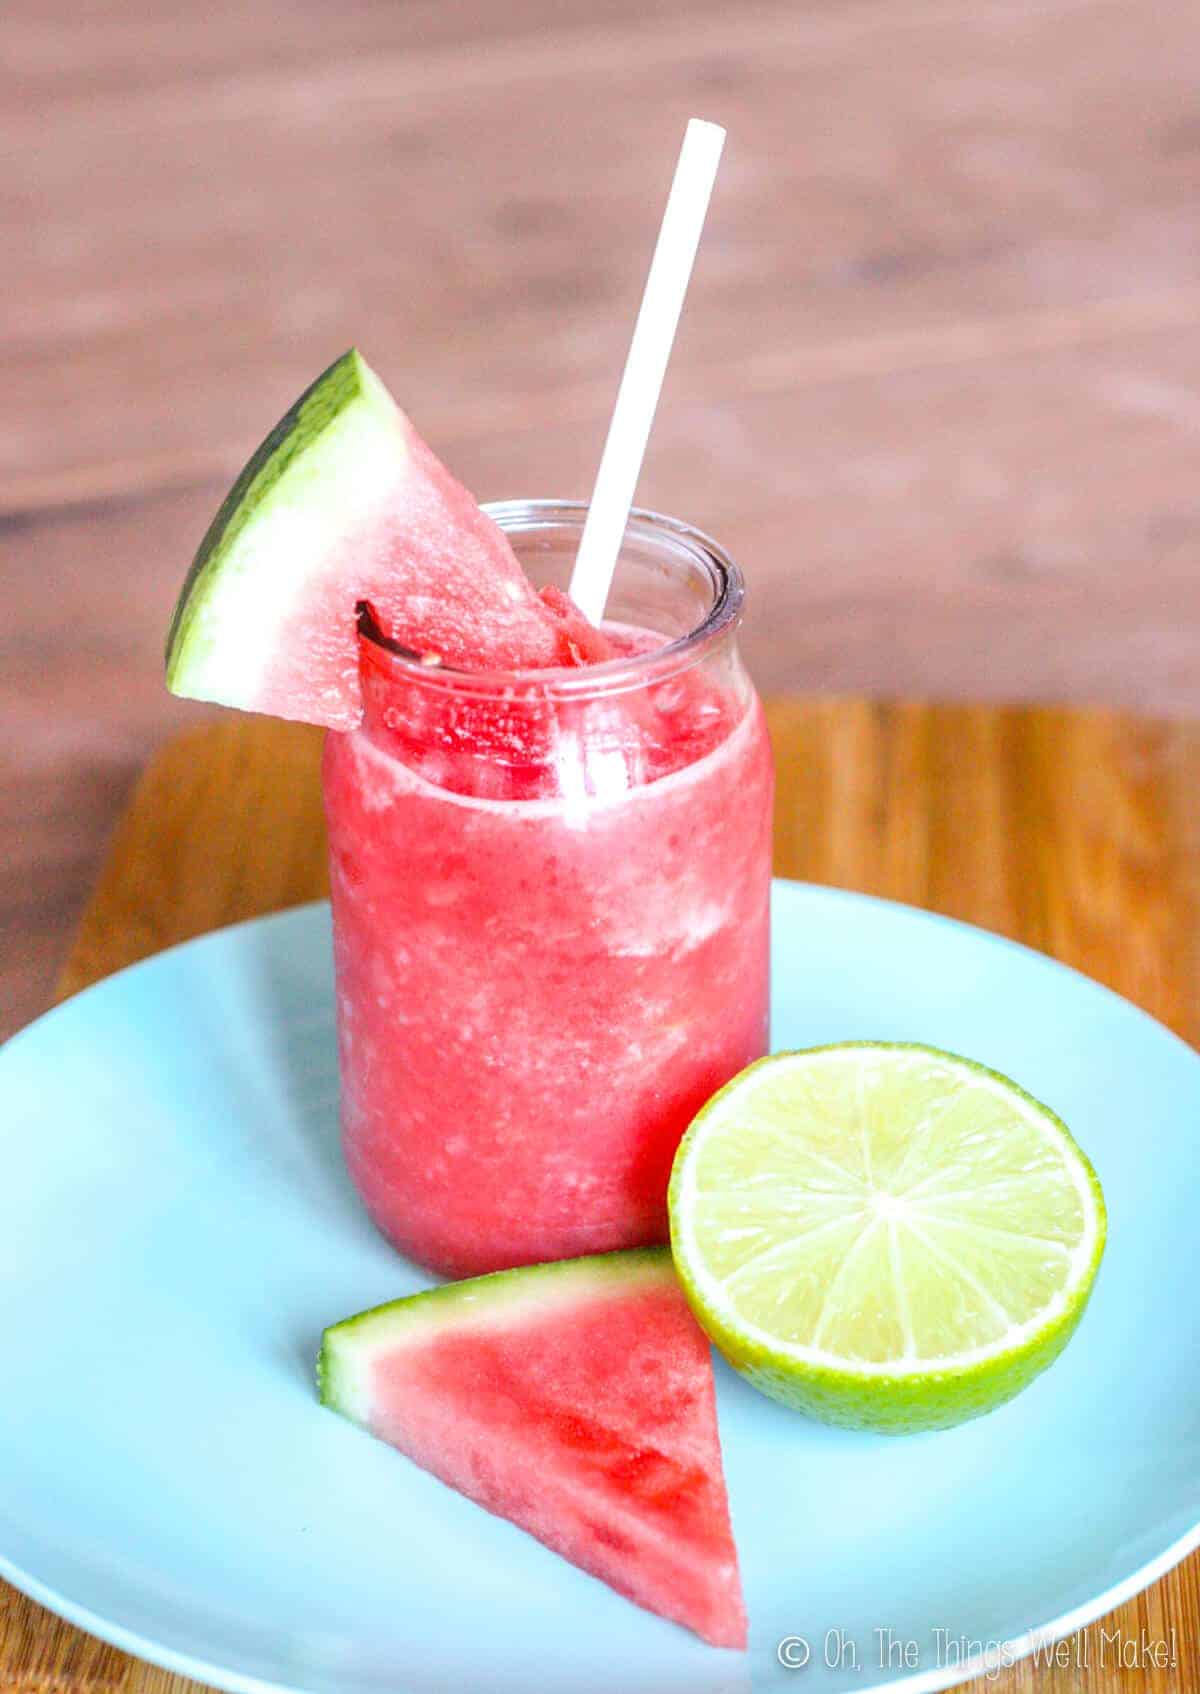 A watermelon slush on a plate with some watermelon and a lime slice.